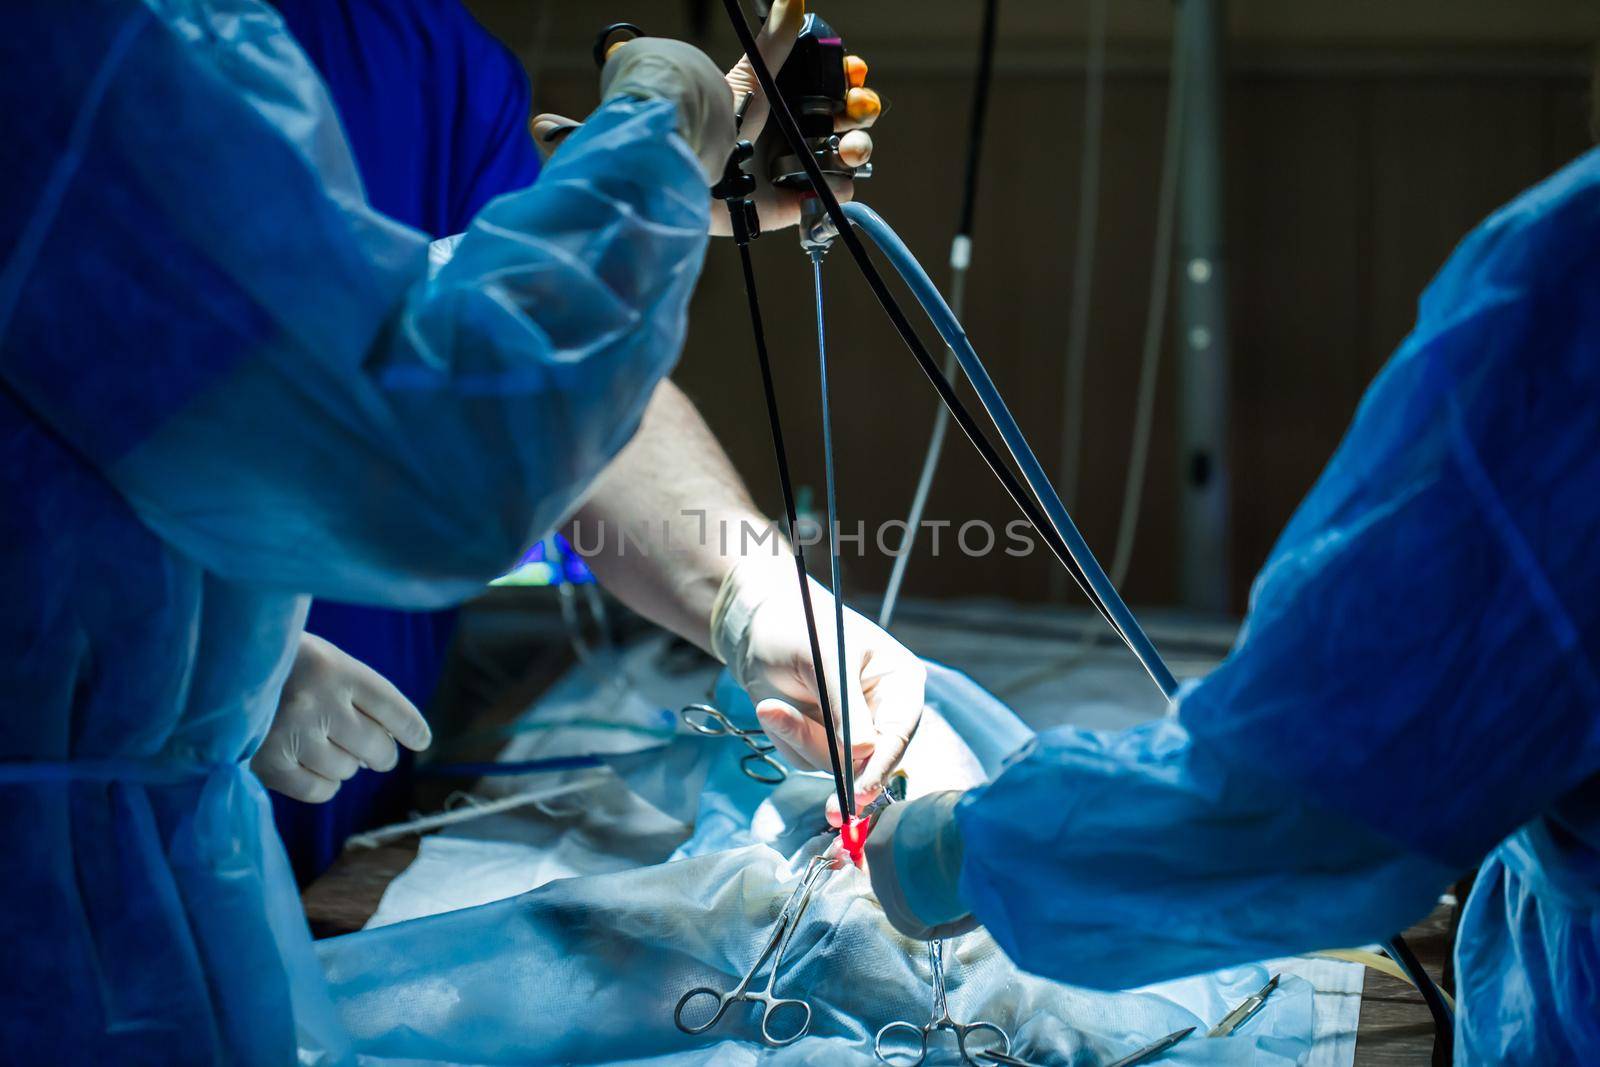 Veterinarian doctor in operation room for laparoscopic surgical take with art lighting.